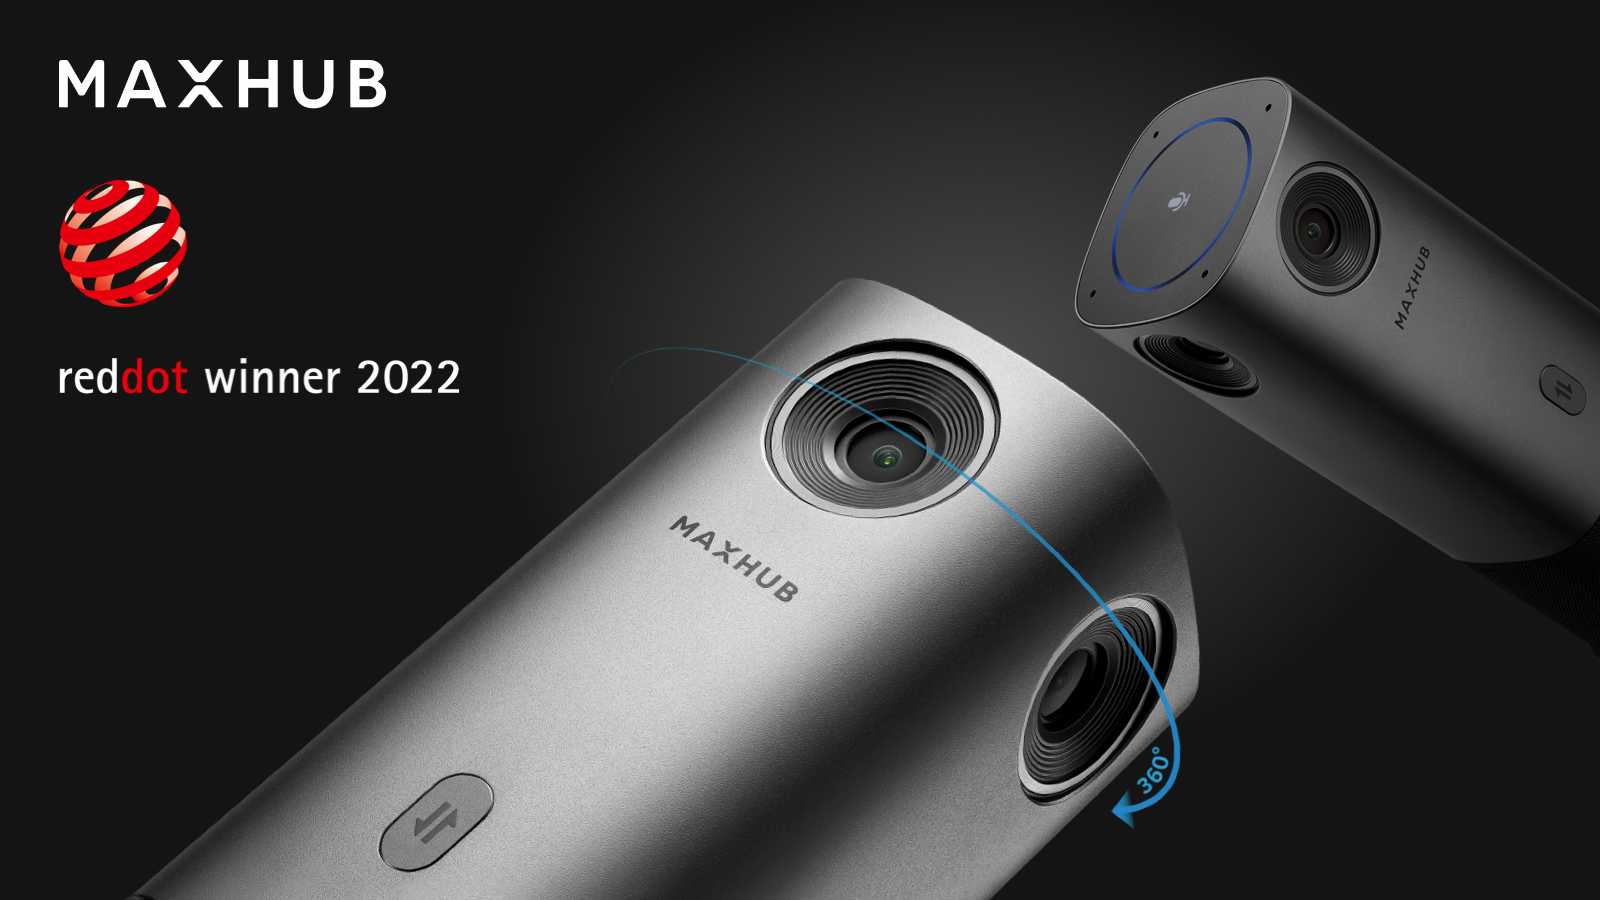 Stories Behind the Great Design of the MAXHUB UC M40 All-in-one Camera